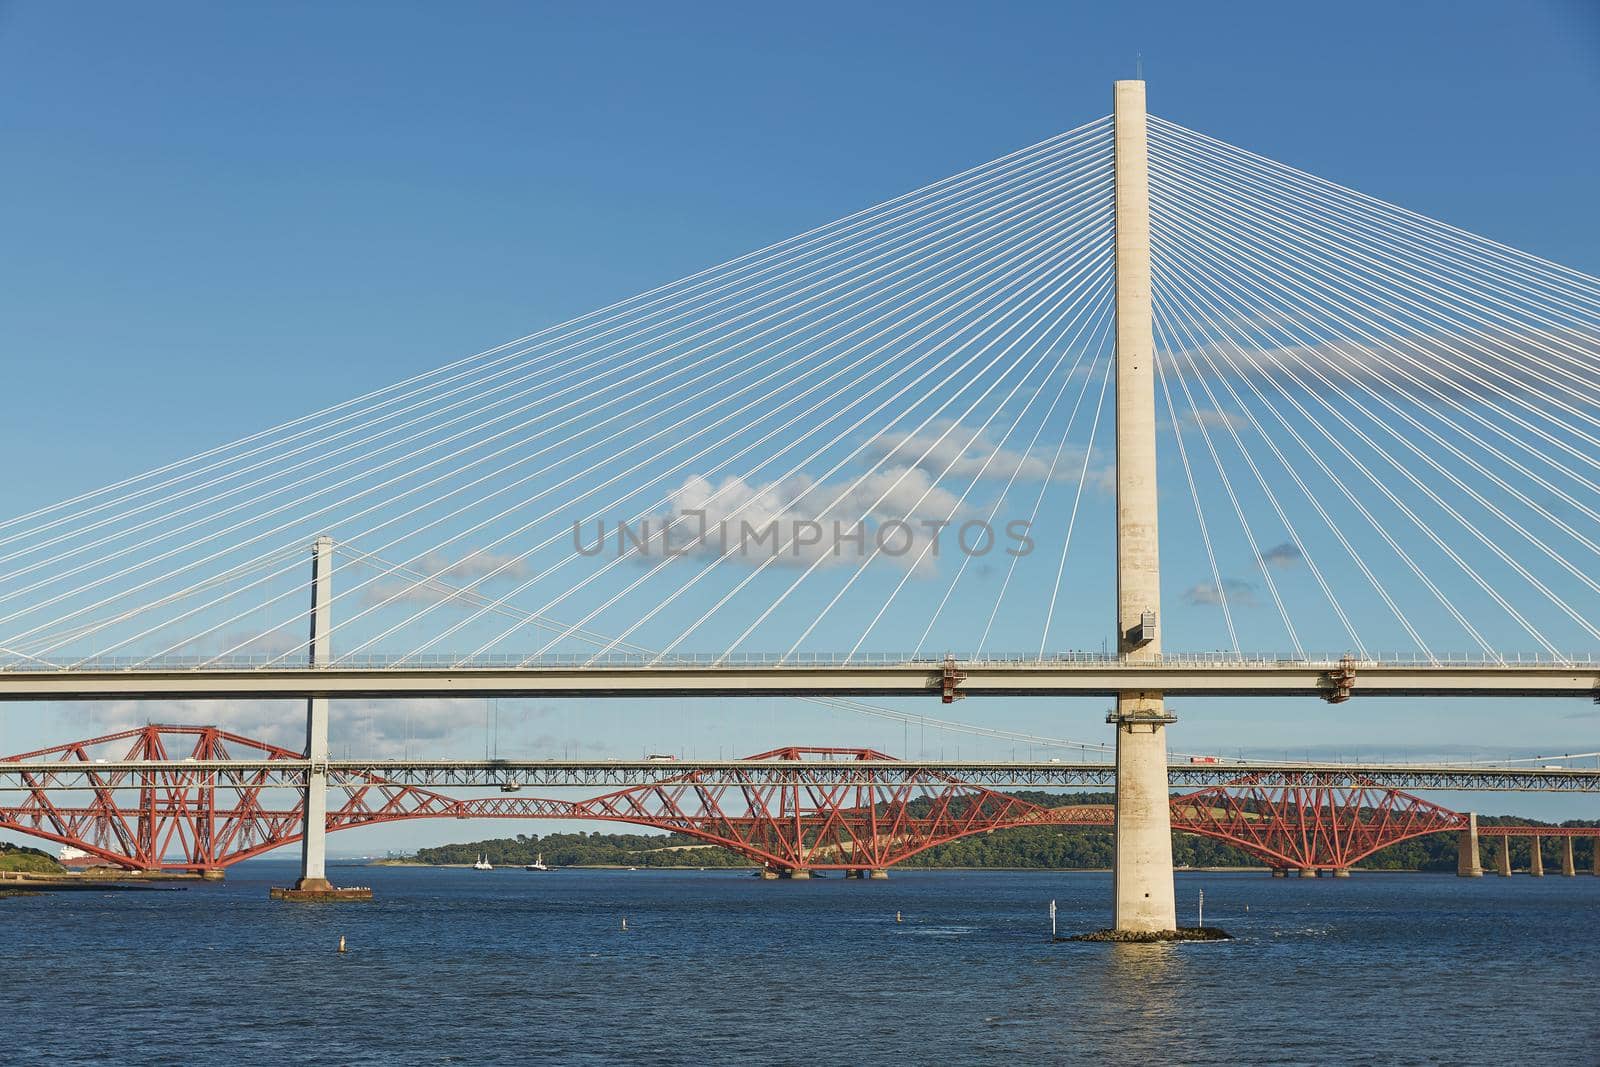 The new Queensferry Crossing bridge over the Firth of Forth with the older Forth Road bridge and the iconic Forth Rail Bridge in Edinburgh Scotland